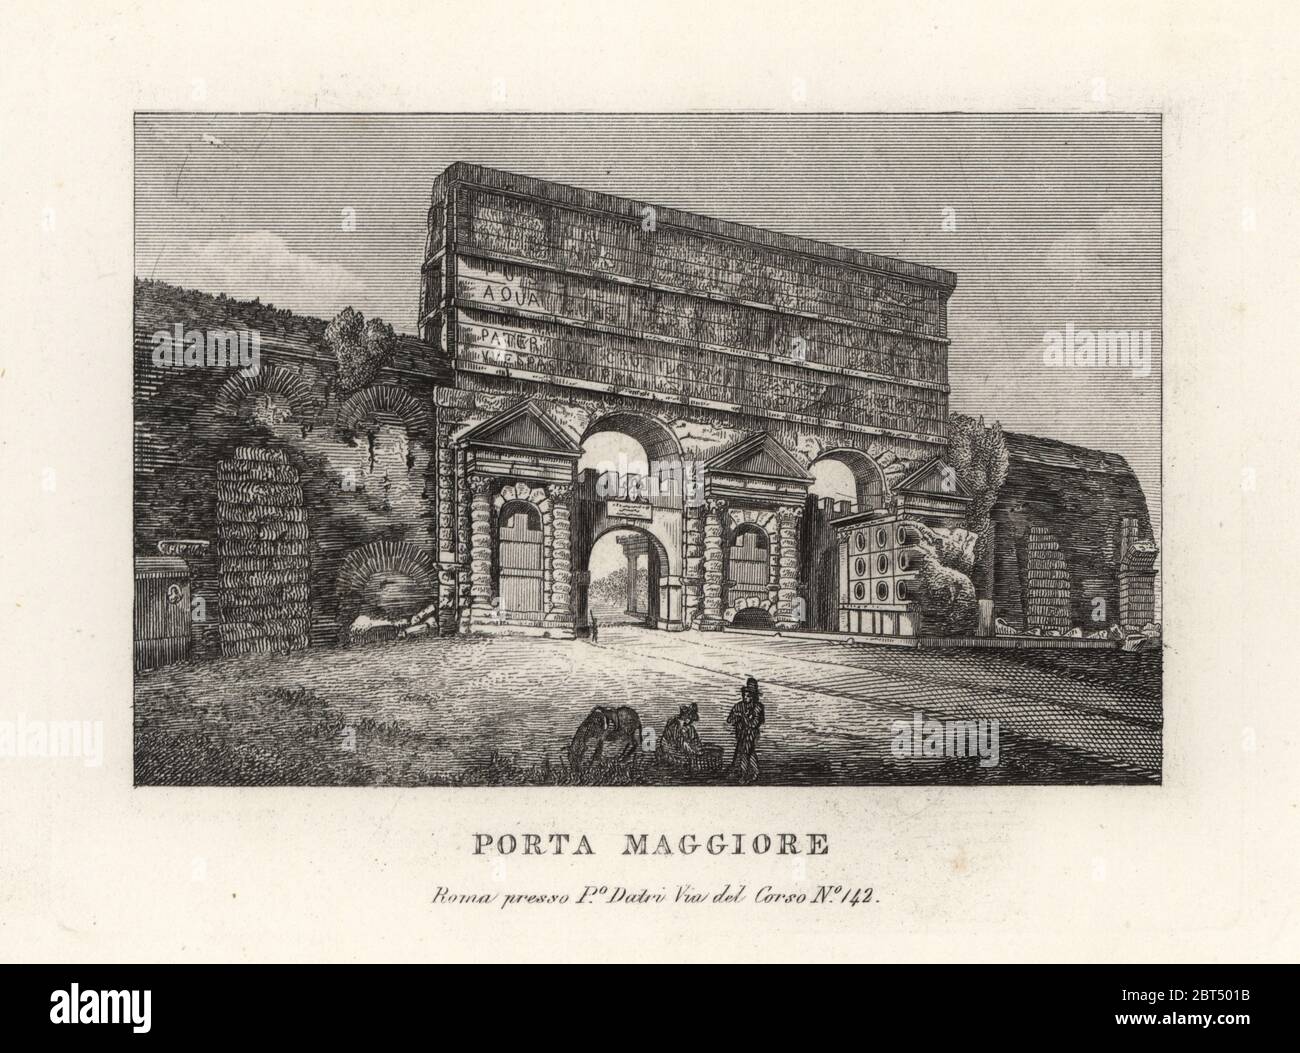 View of the Porta Maggiore gate with aqueducts, Larger Gate or Porta Prenestina, in the Aurelian Wall, Rome. Copperplate engraving from Pietro Datri's New Collection of Principal Views of Rome Ancient and Modern with the ruins of war, Rome, 1849. Stock Photo